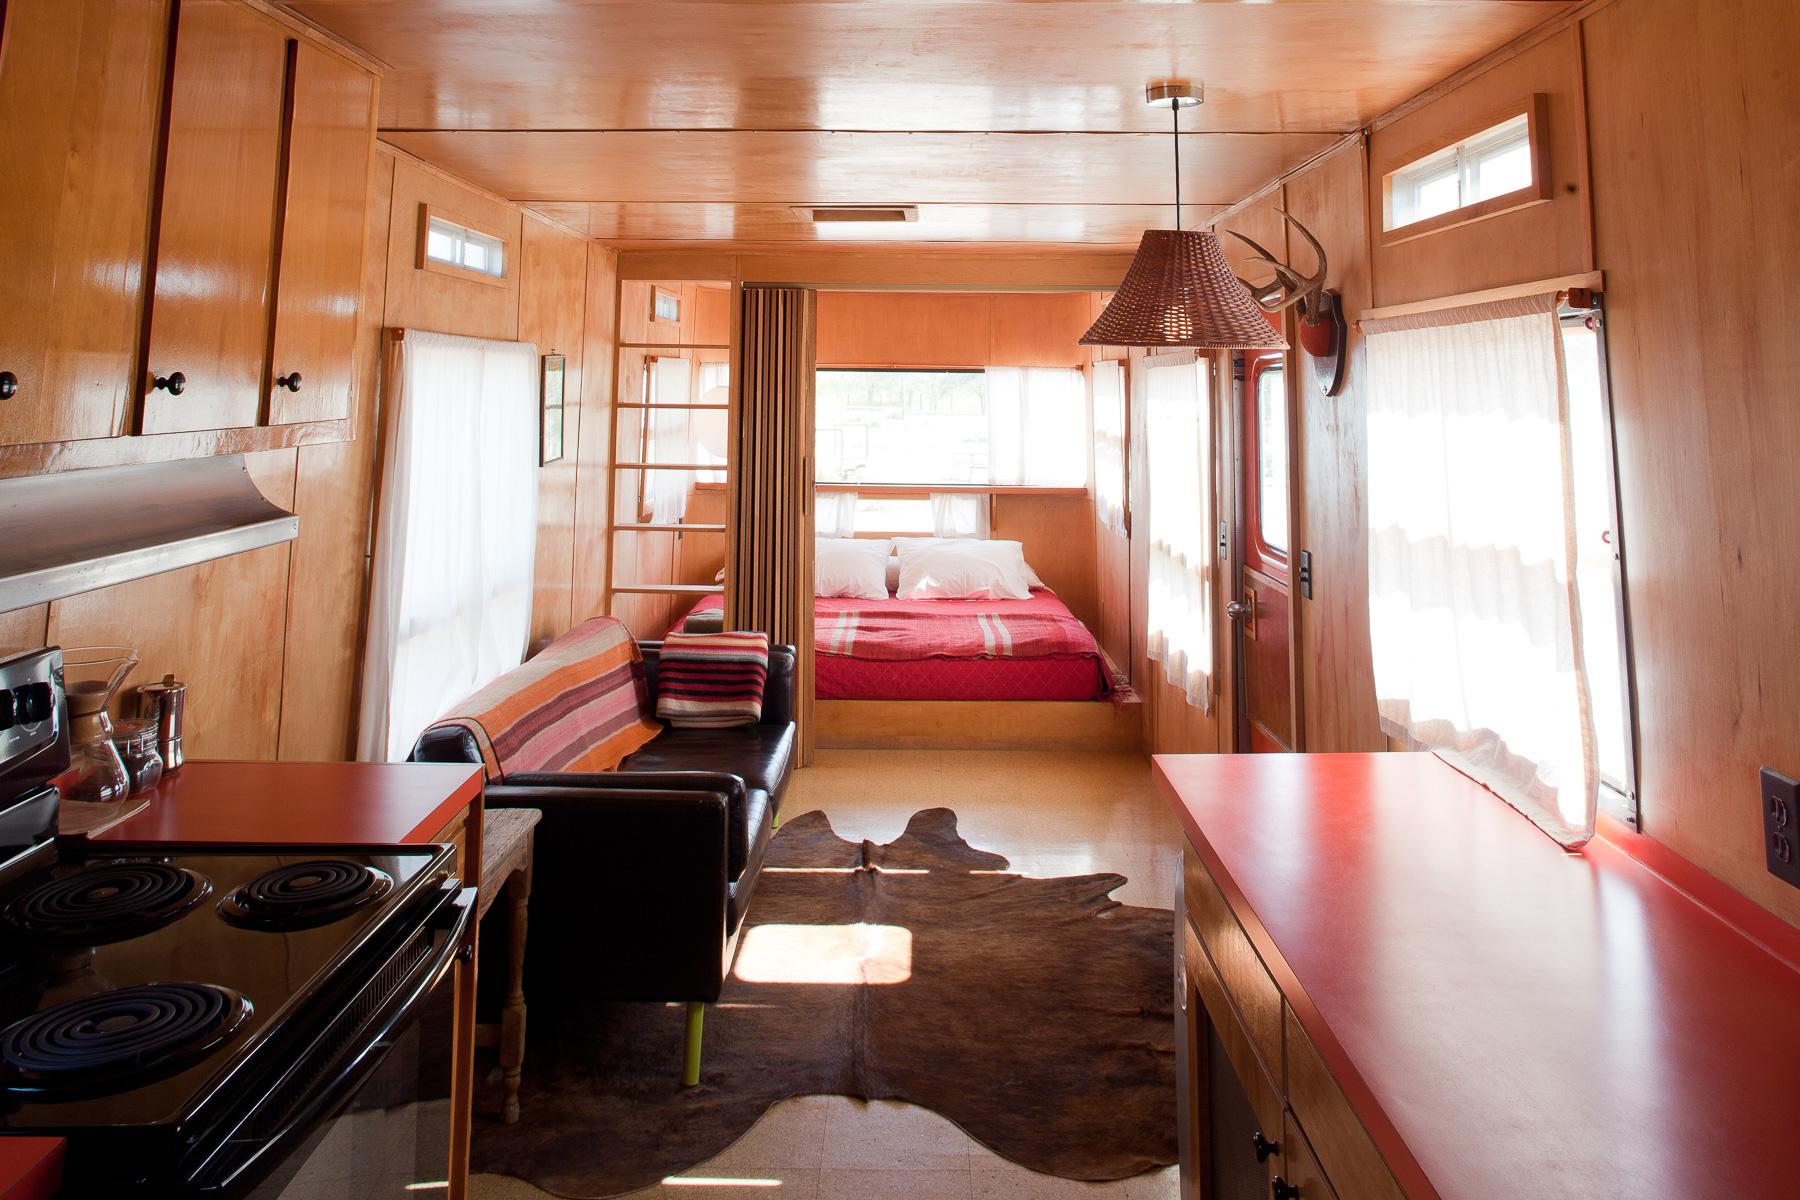 Vintage Trailer And Airstream Rentals For A Glamping Vacation